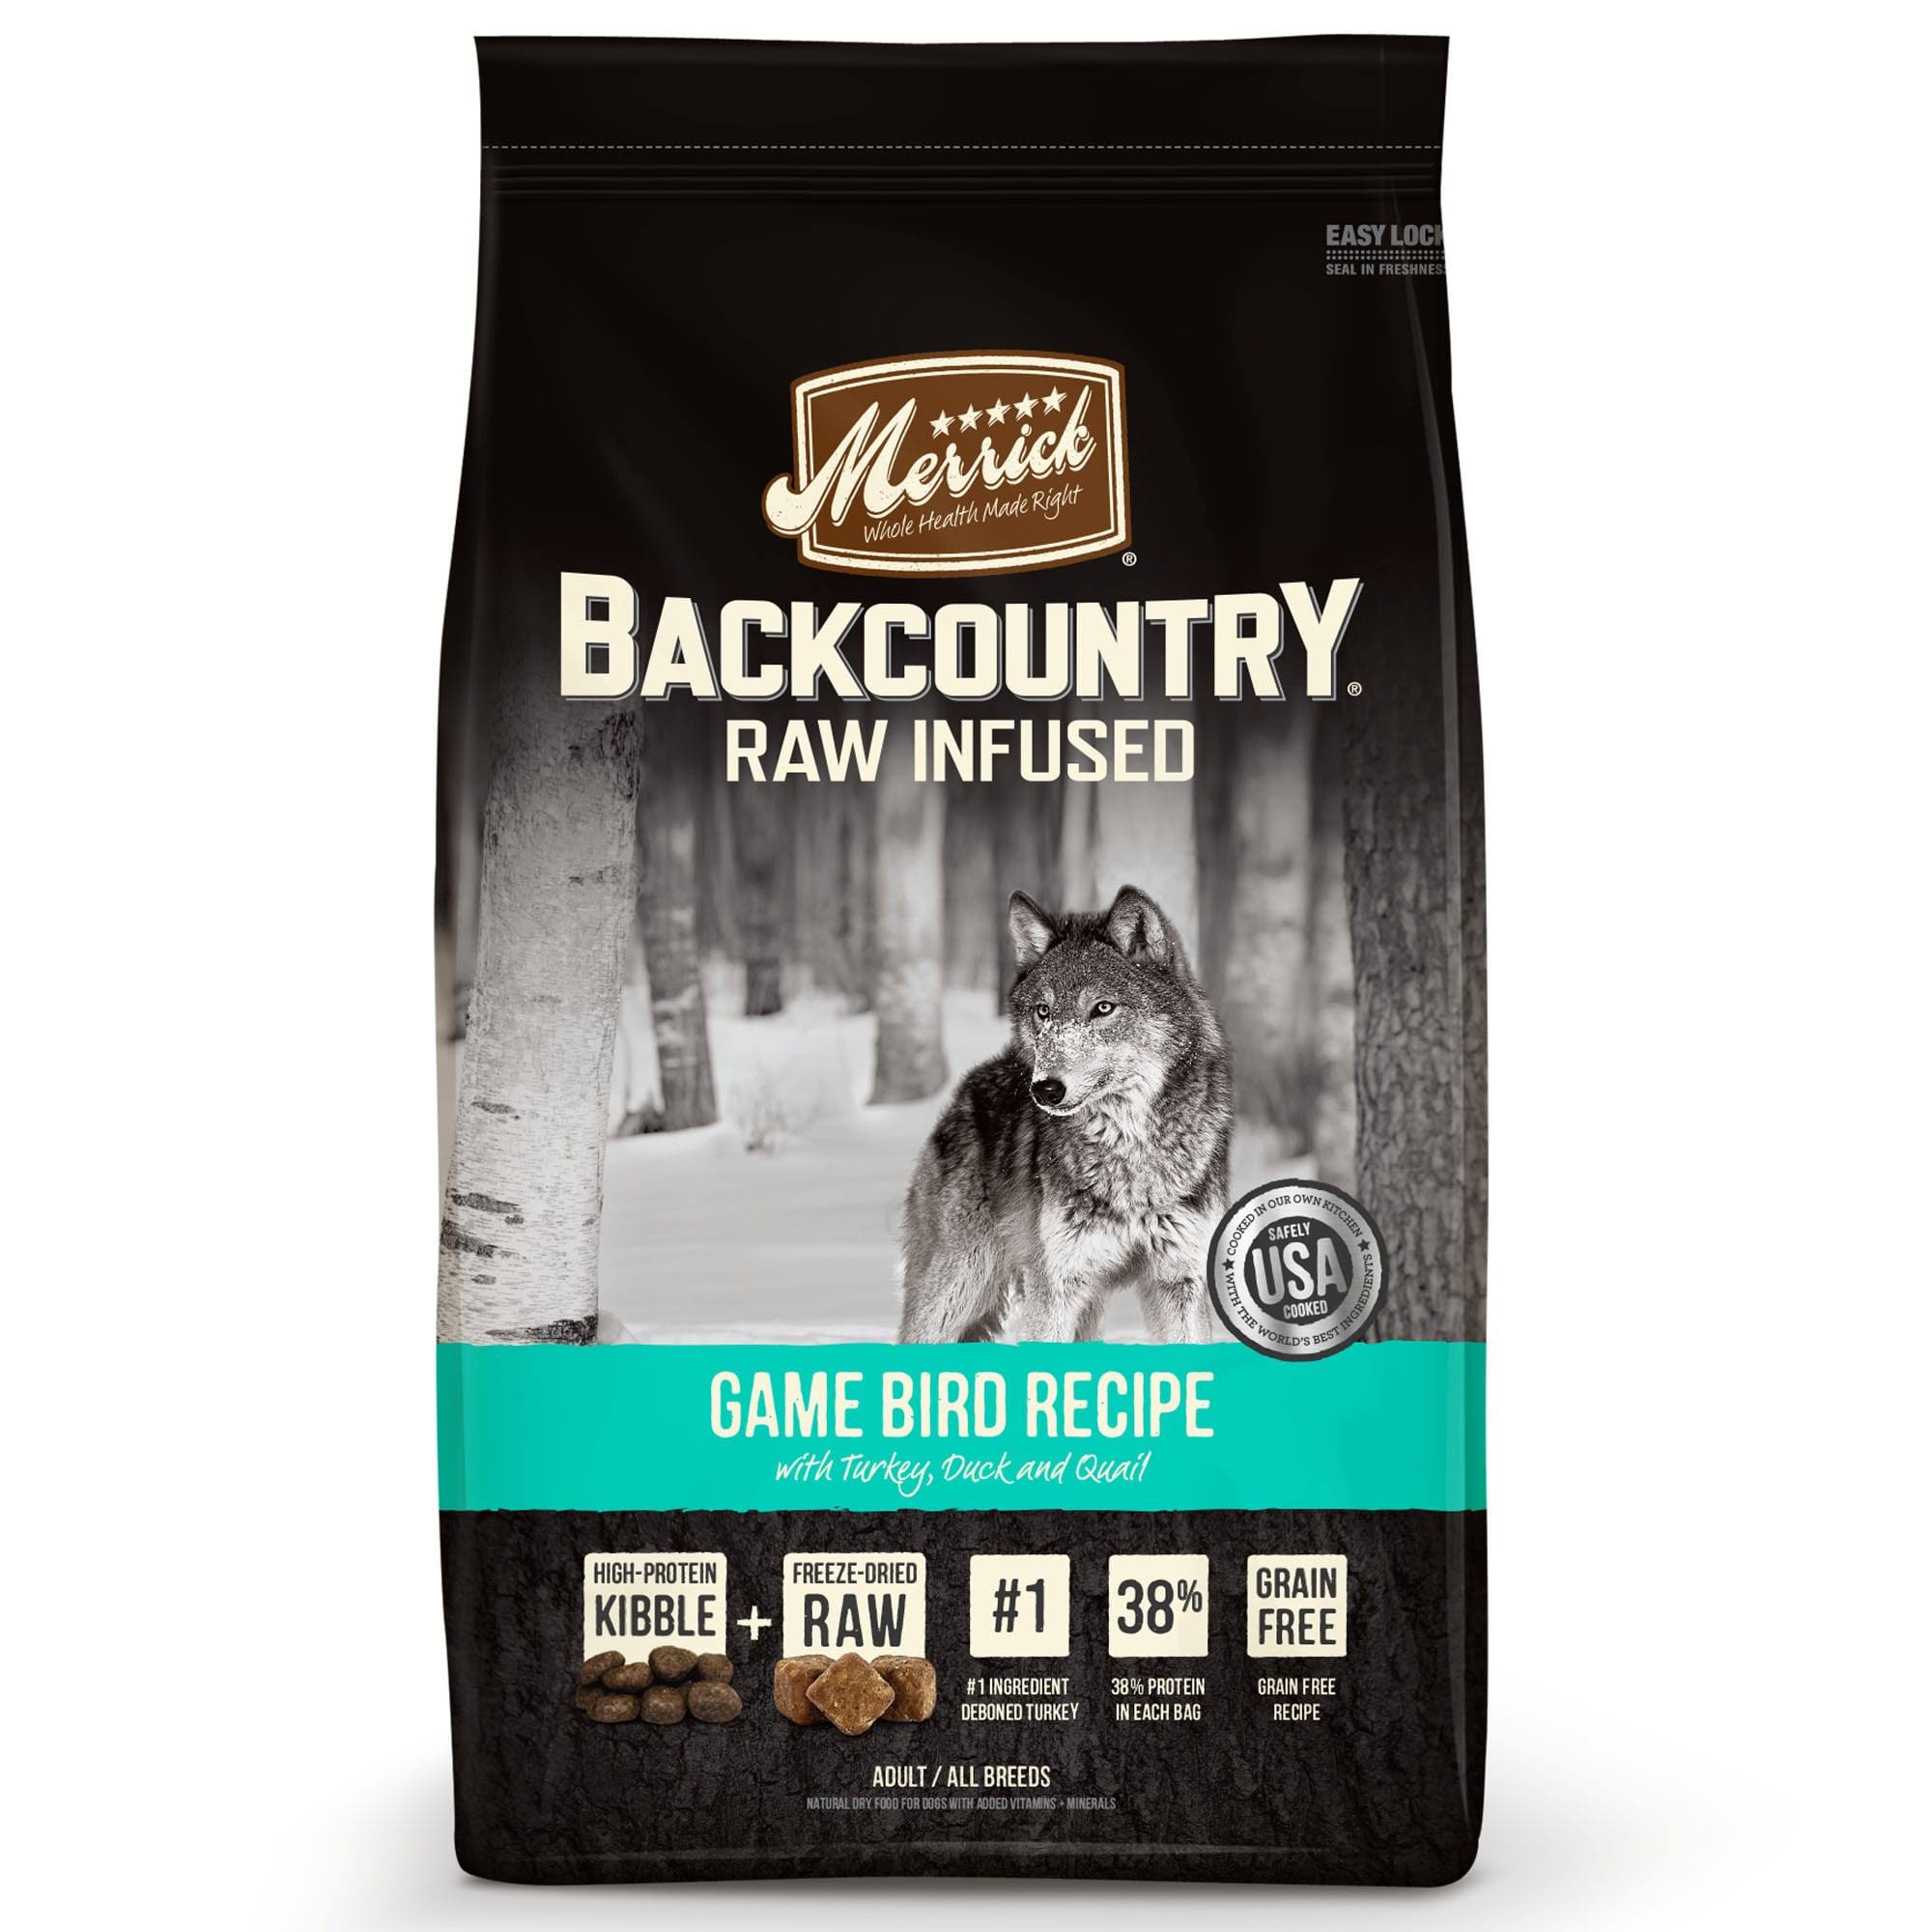 Merrick Backcountry Raw Infused Dog Food - Game Bird With Turkey Duck And Quail